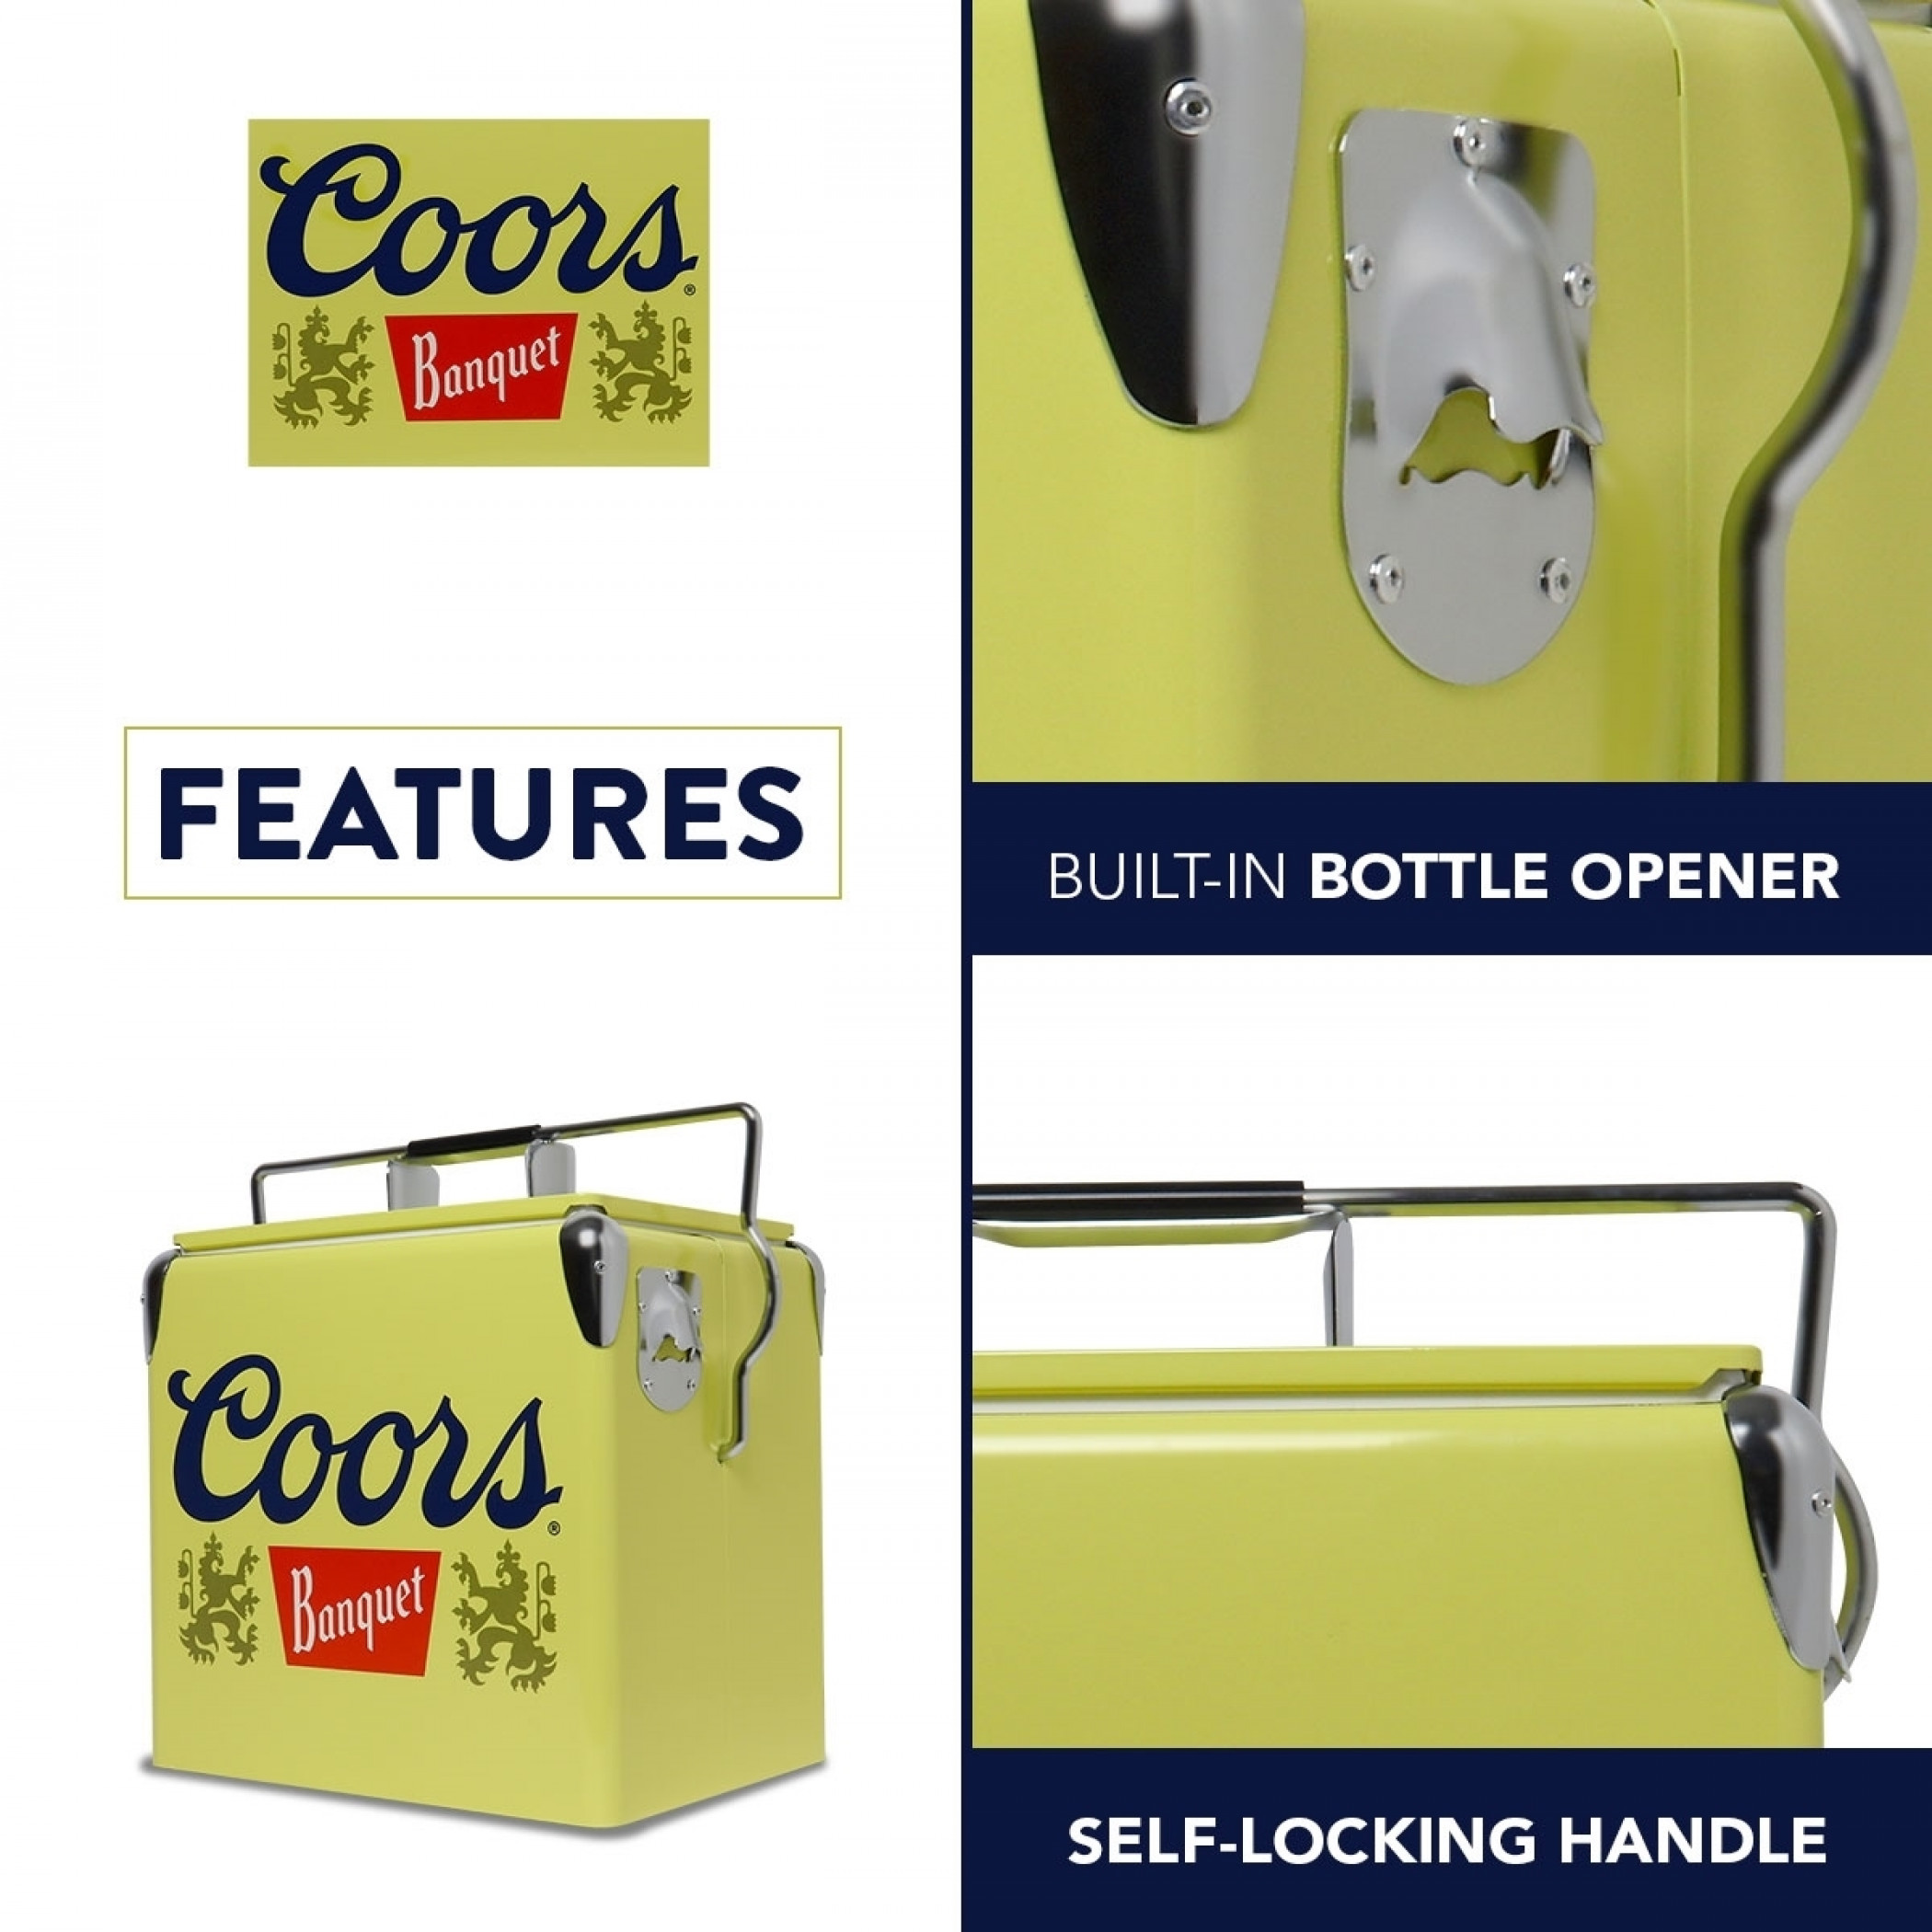 https://mmv2api.s3.us-east-2.amazonaws.com/products/images/0003844_coors-banquet-retro-ice-chest-cooler-with-bottle-opener-13l.jpeg